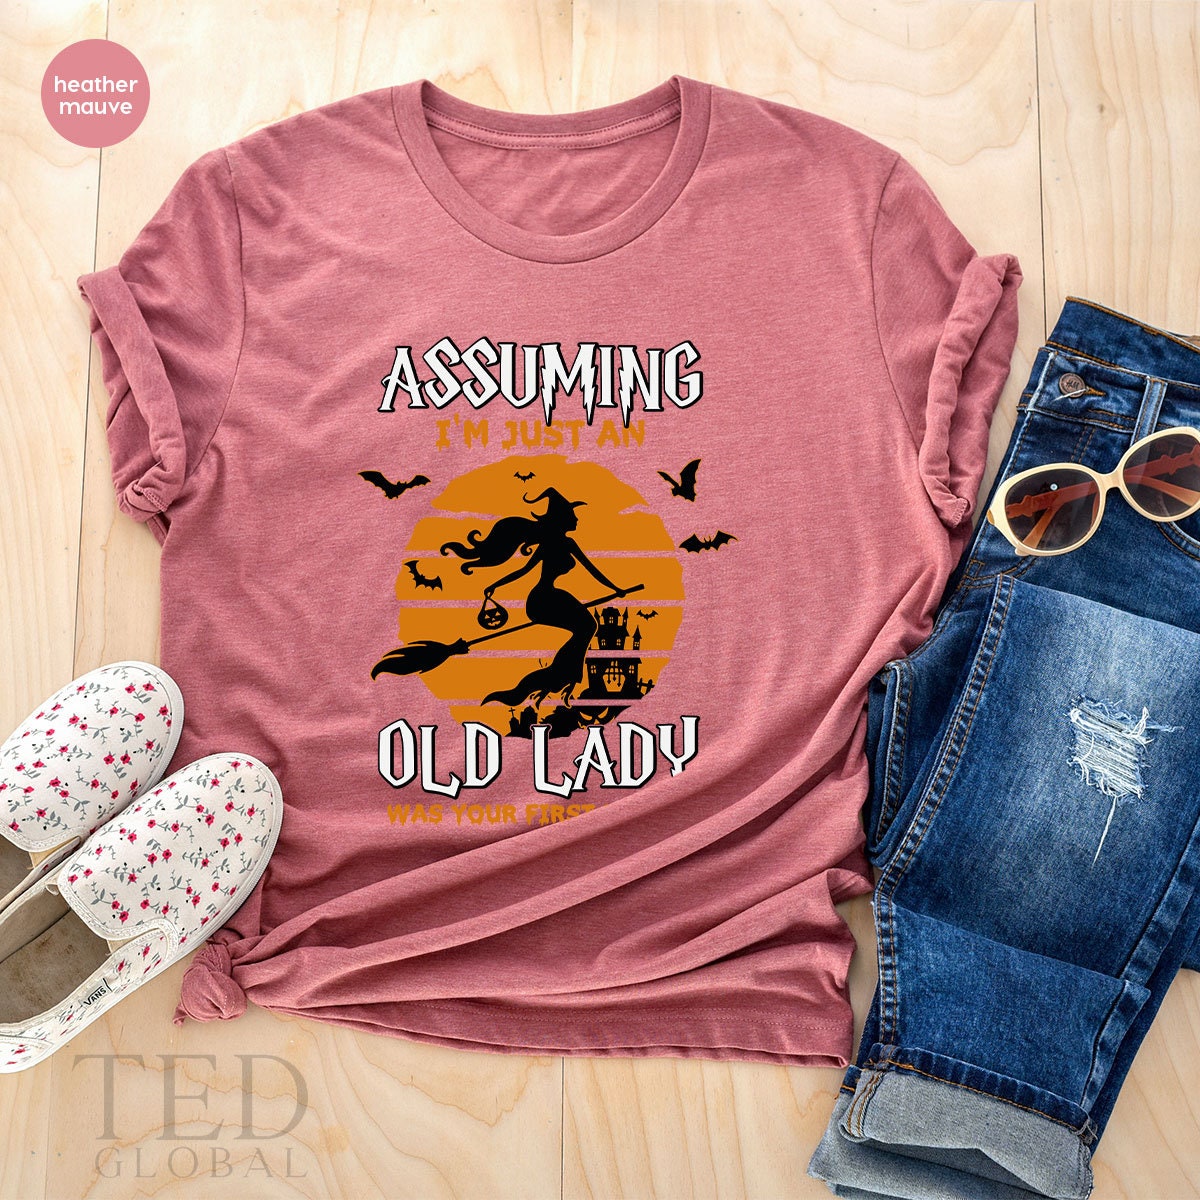 Funny Witch Shirt, Assuming I'm Just An Old Lady Was Your First Mistake T-Shirt, Halloween T Shirt, Witch Broom Shirts, Halloween Gift - Fastdeliverytees.com